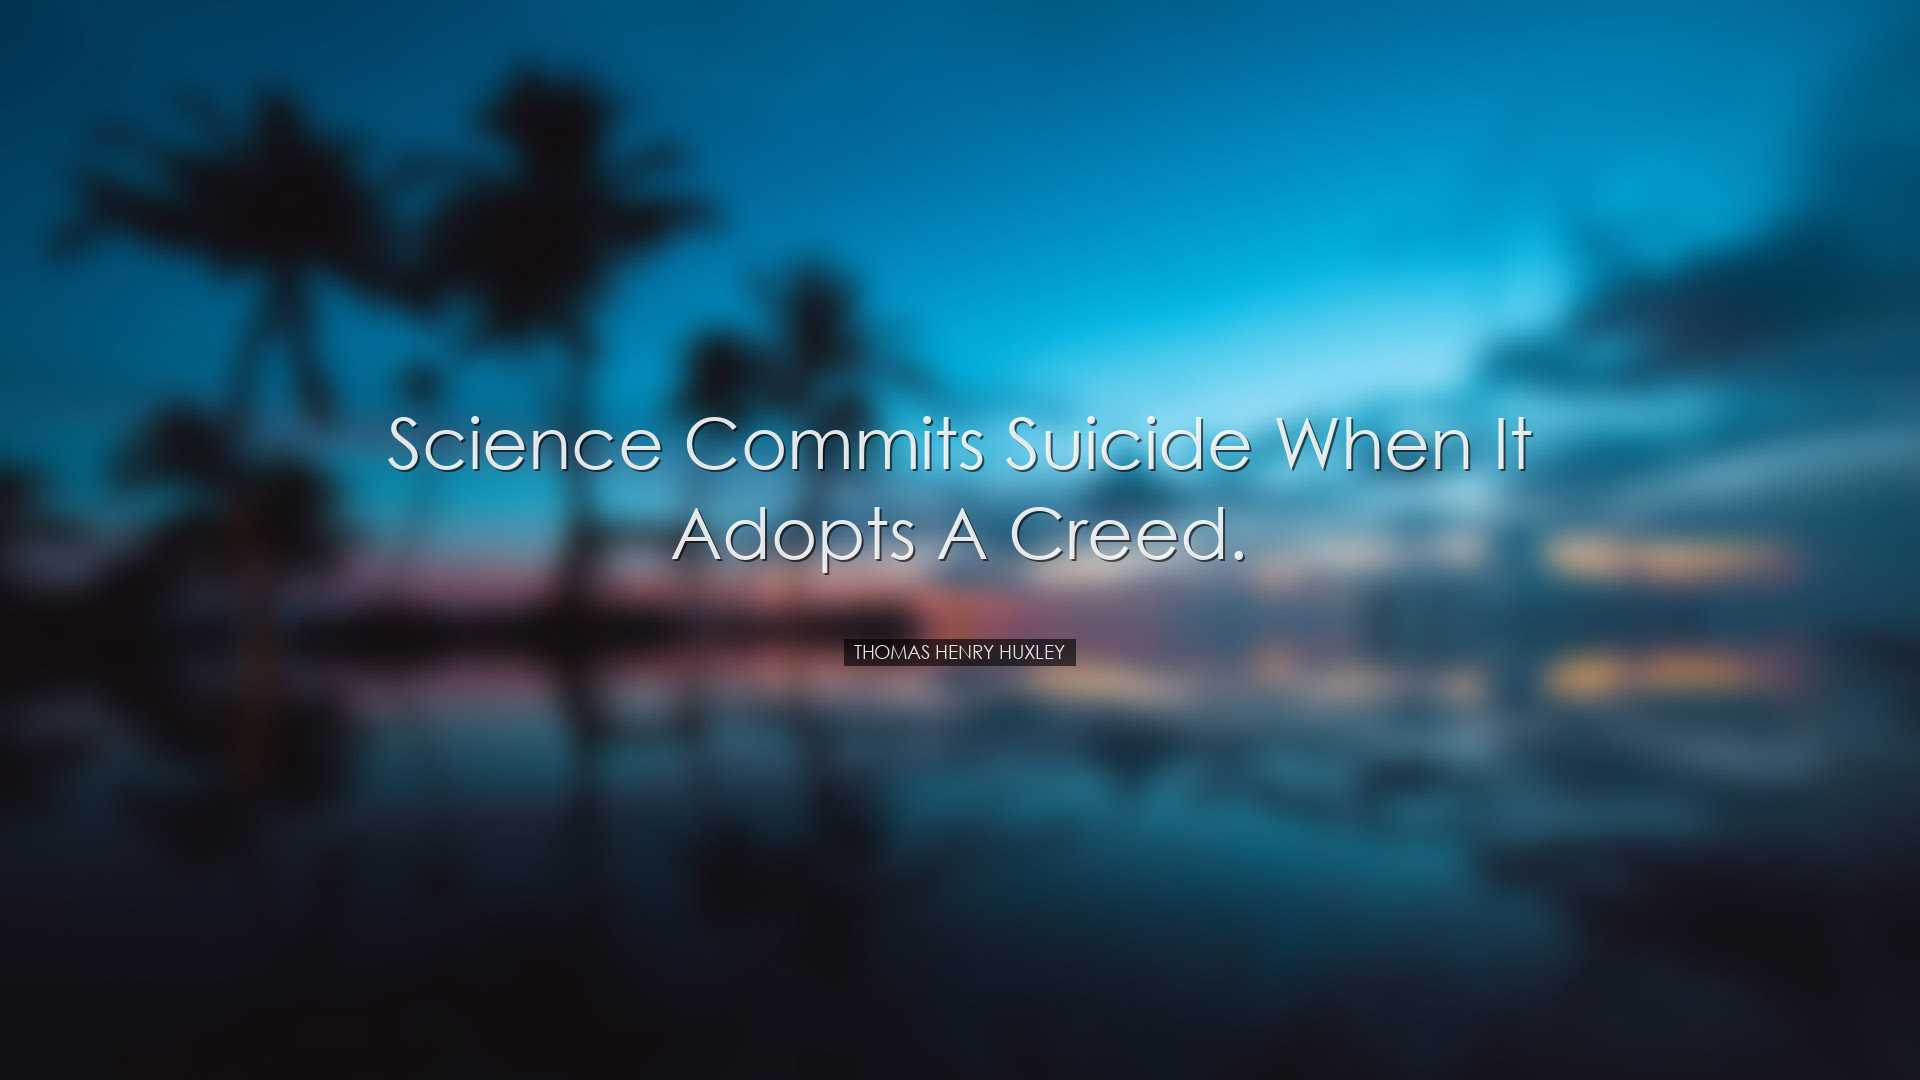 Science commits suicide when it adopts a creed. - Thomas Henry Hux